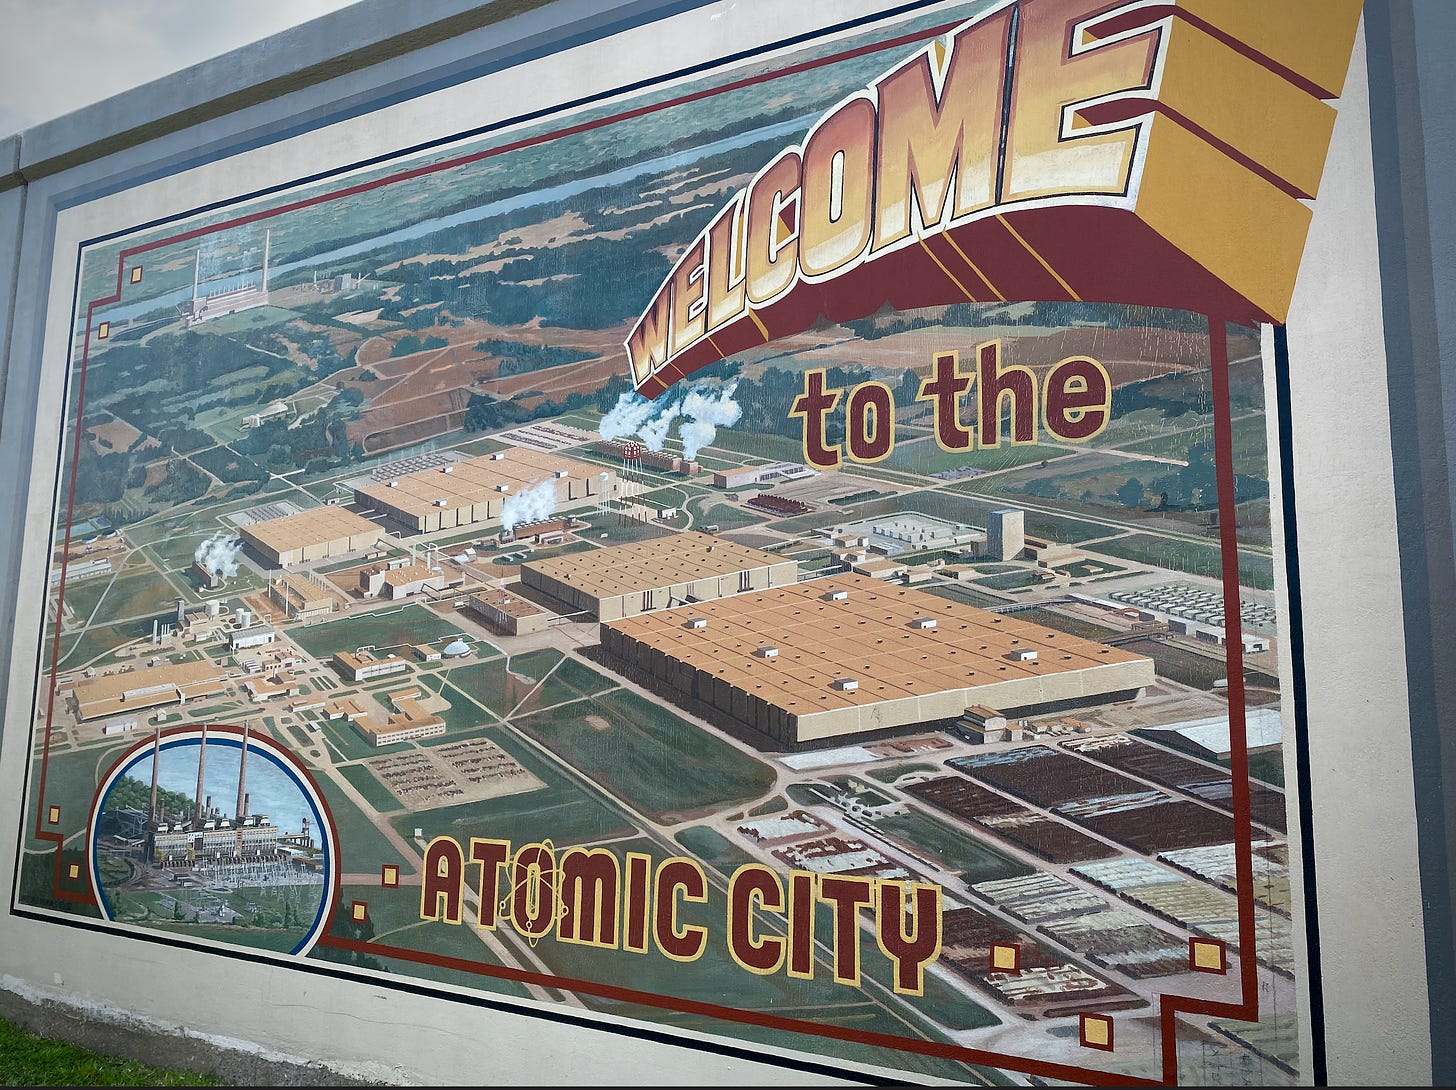 Paducah, KY floodwall mural commemorating nuclear history